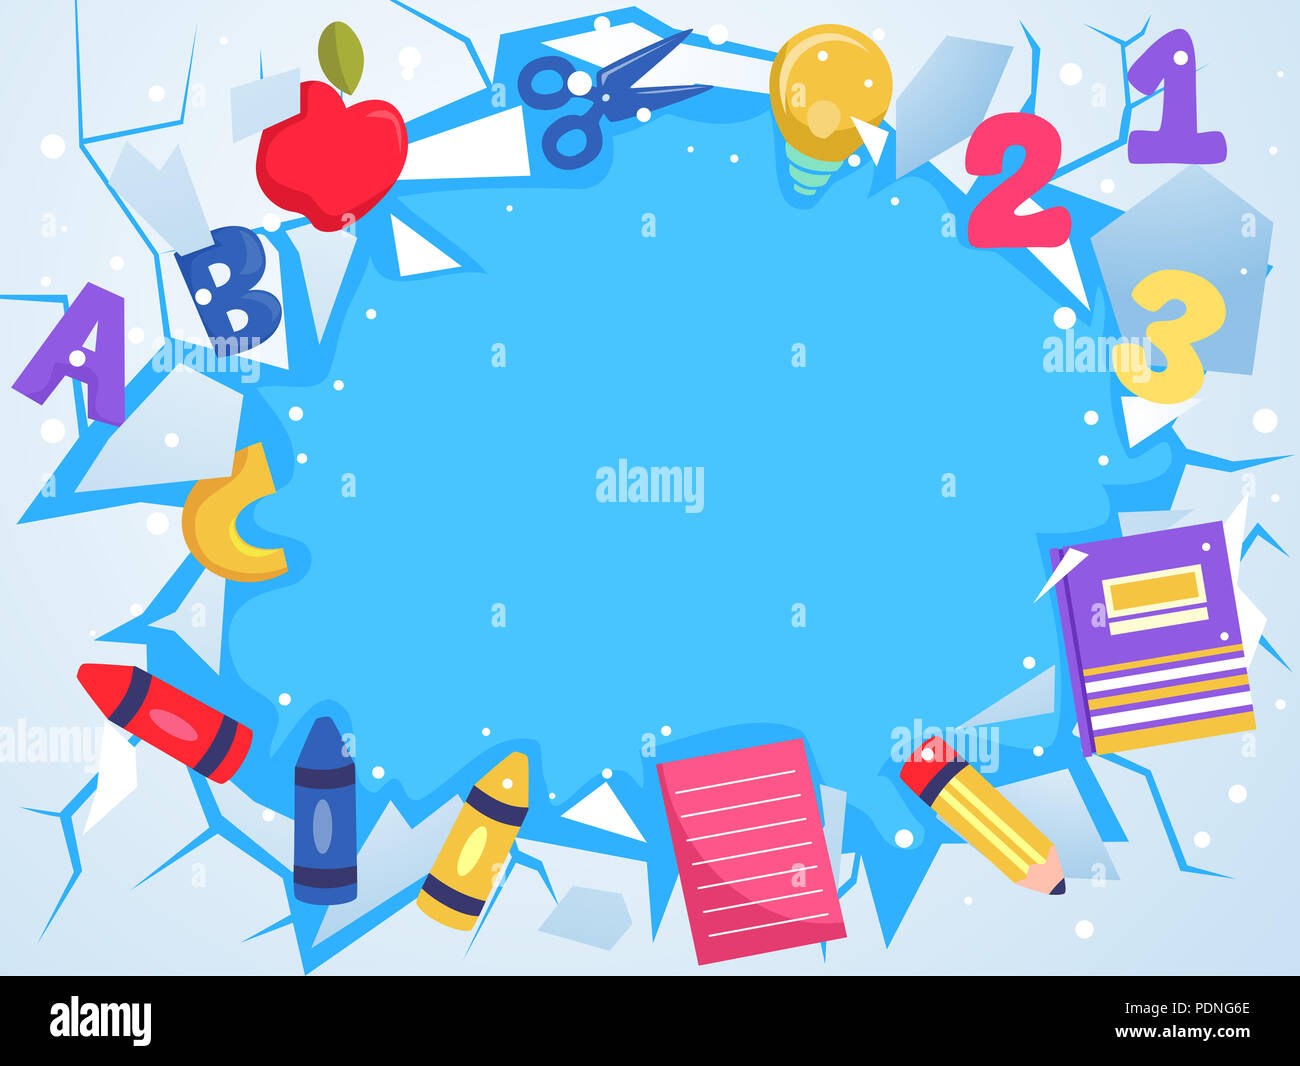 Background Illustration of Cracked Ice with School Elements like ABC,  crayons, notebooks, pencil and 123 Stock Photo - Alamy